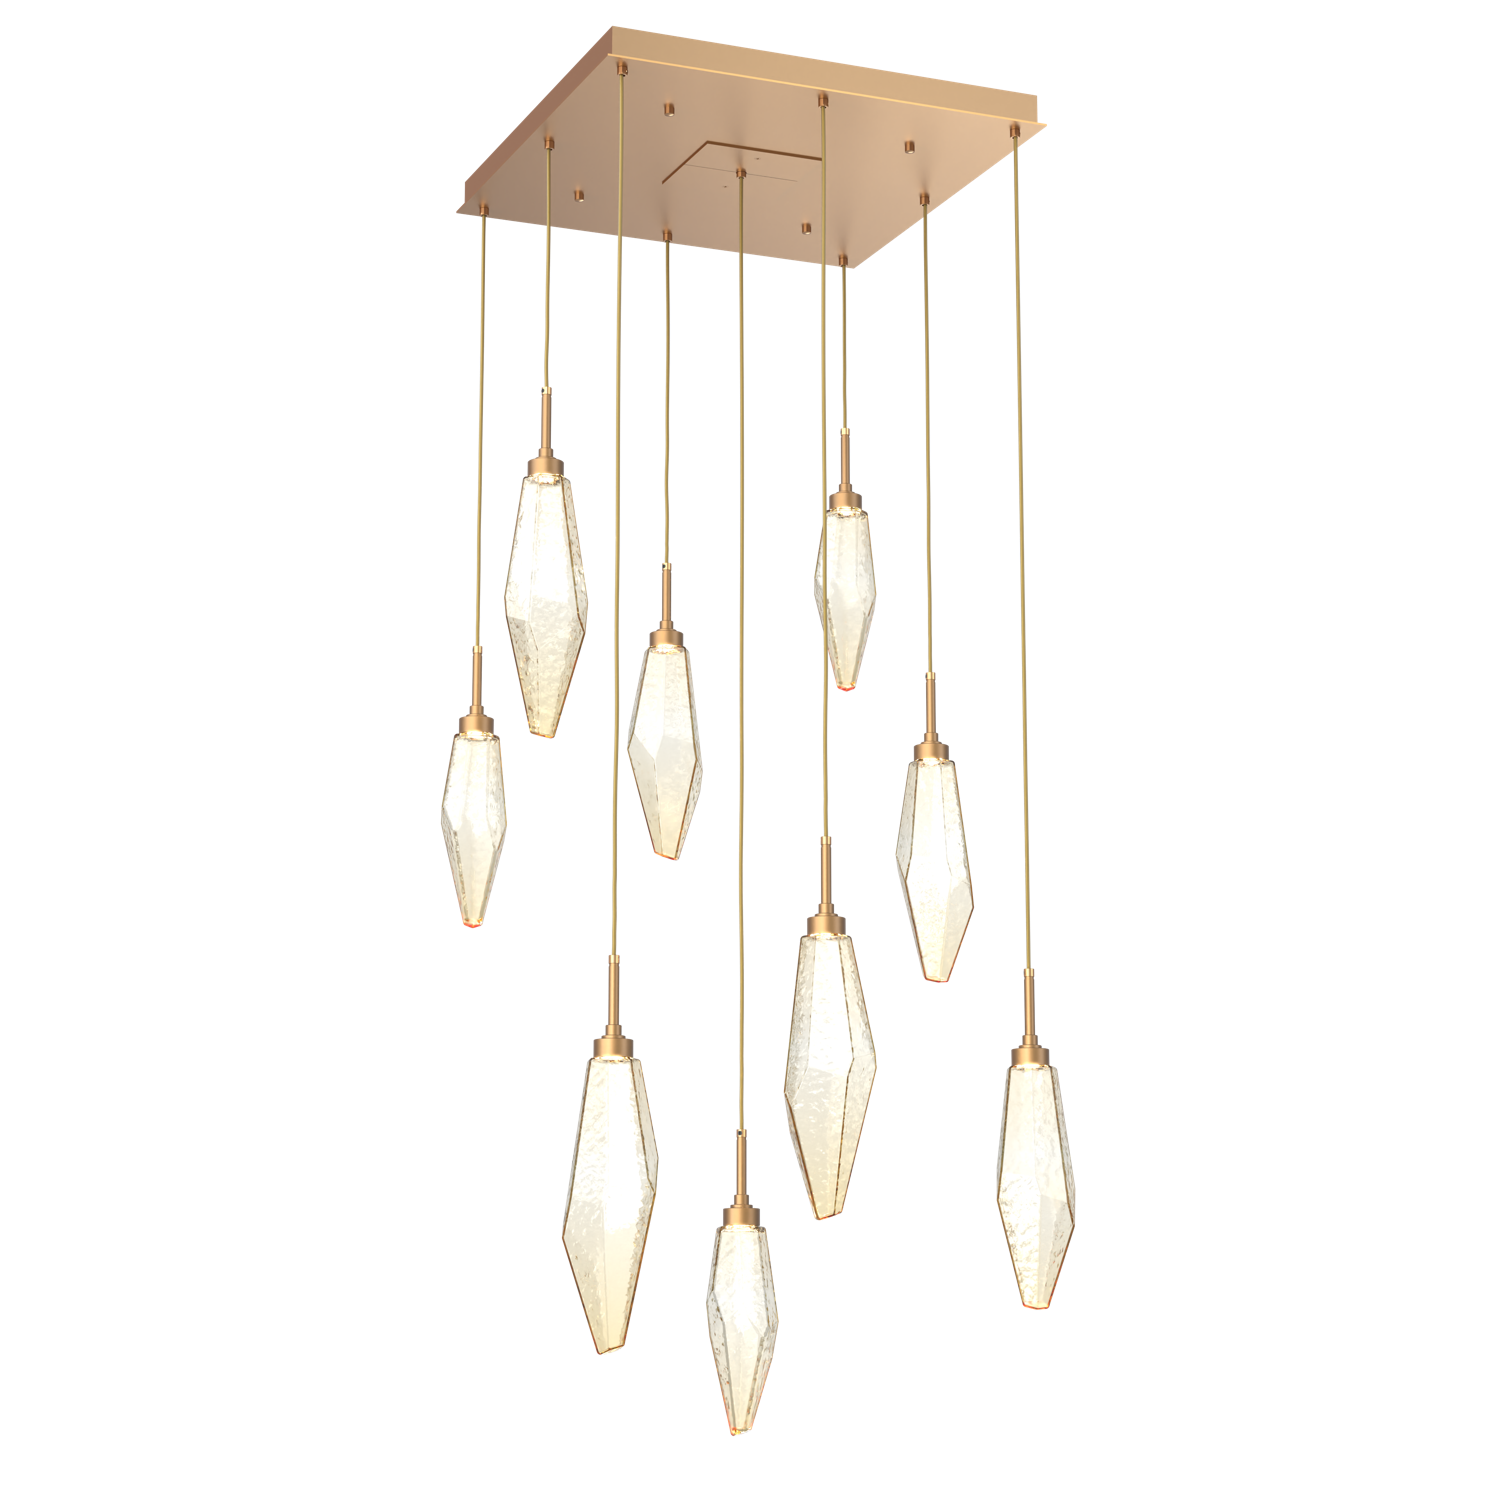 CHB0050-09-NB-CA-Hammerton-Studio-Rock-Crystal-9-light-square-pendant-chandelier-with-novel-brass-finish-and-chilled-amber-blown-glass-shades-and-LED-lamping